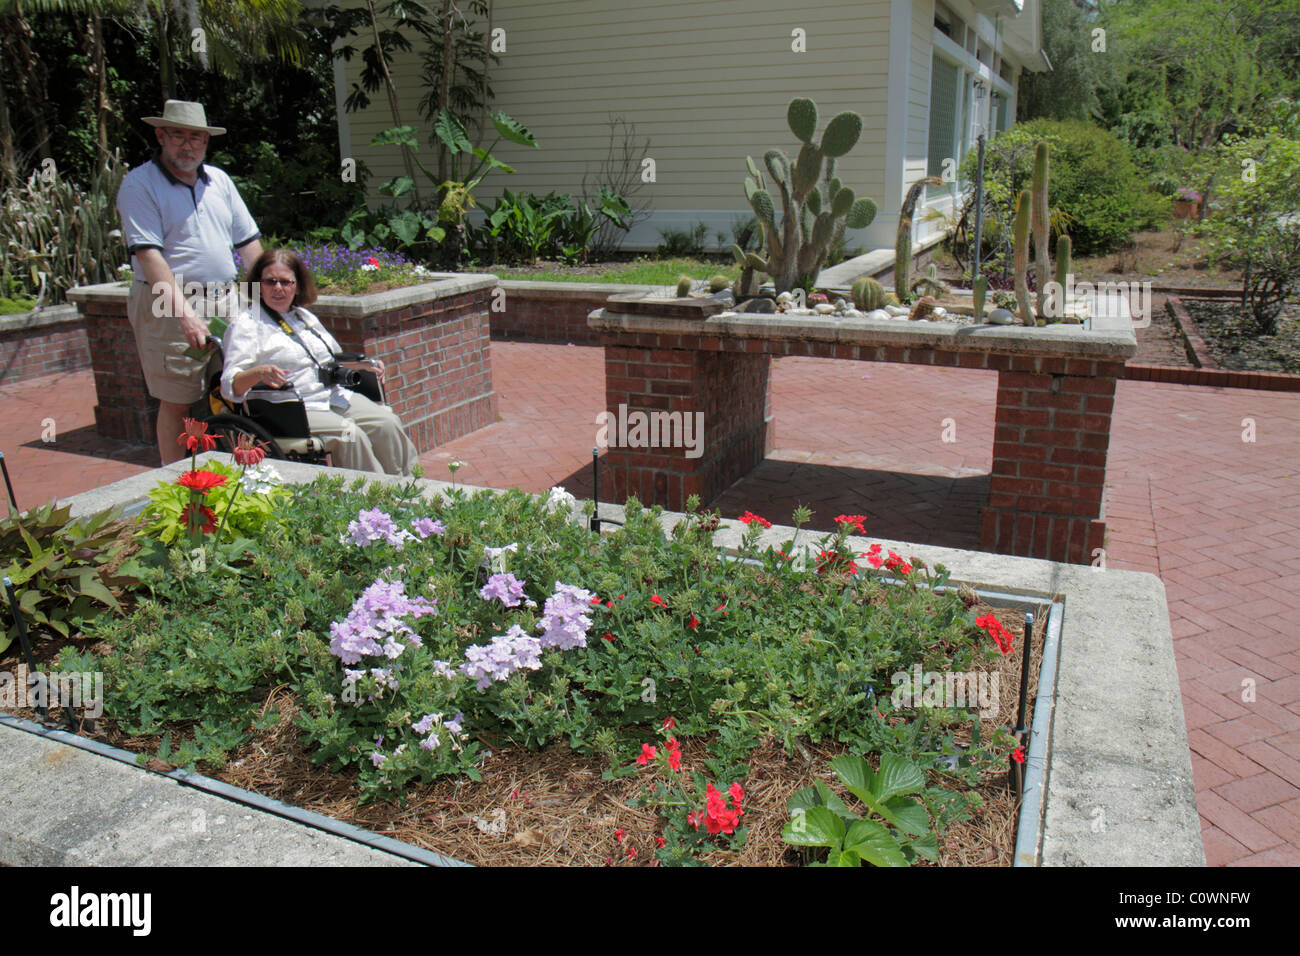 Orlando Florida,Harry P. Leu Gardens,flower flowers,flowerbed,adult adults woman women female lady,wheelchair,disabled disability handicapped special Stock Photo